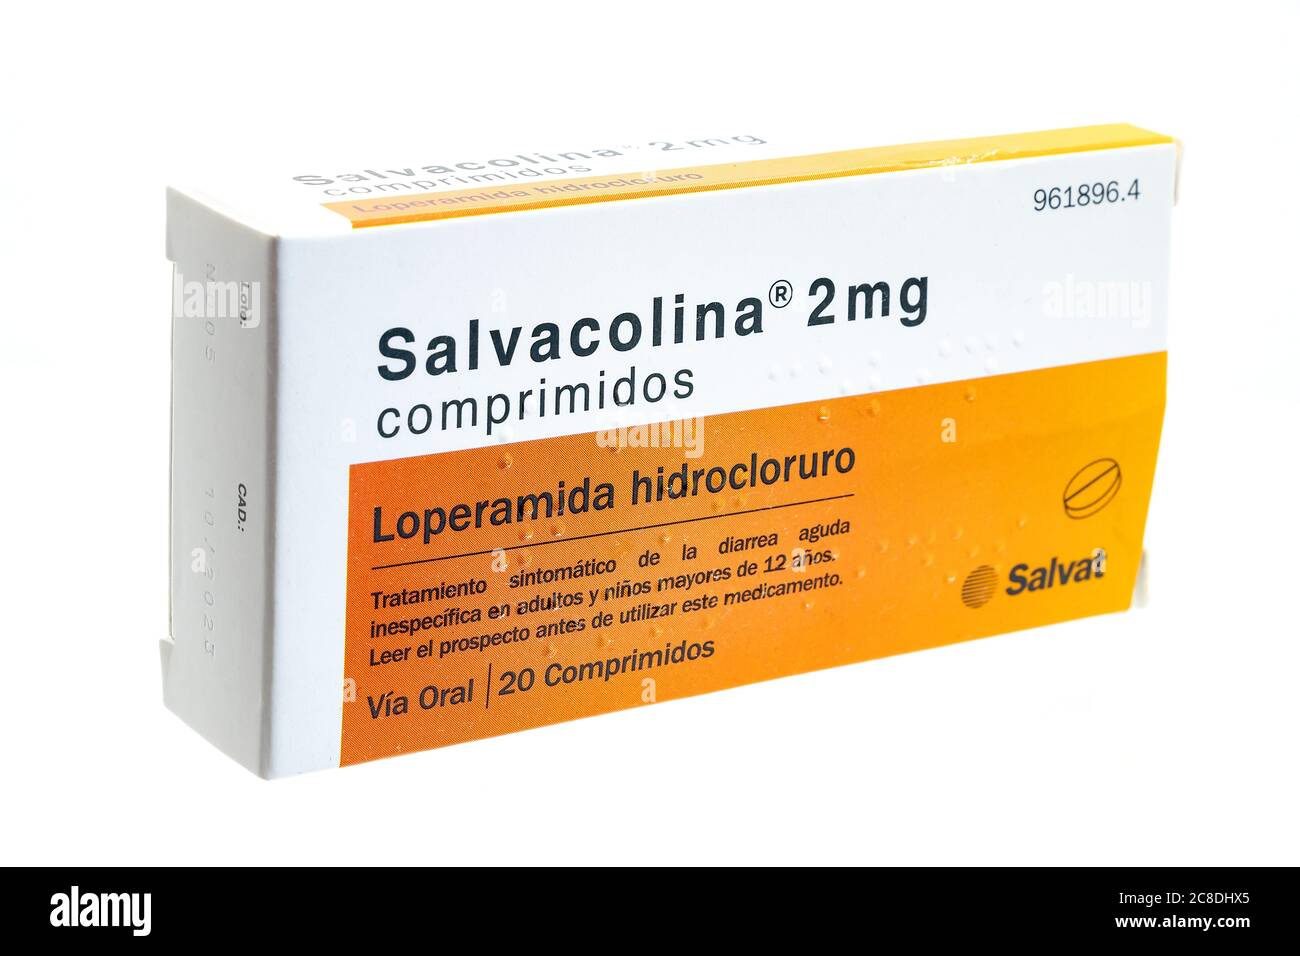 Huelva, Spain - July 23, 2020: Spanish Box of Salvacolina. loperamide  hydrochloride.Is a medicine to treat diarrhoea (runny poo).It can help with  shor Stock Photo - Alamy